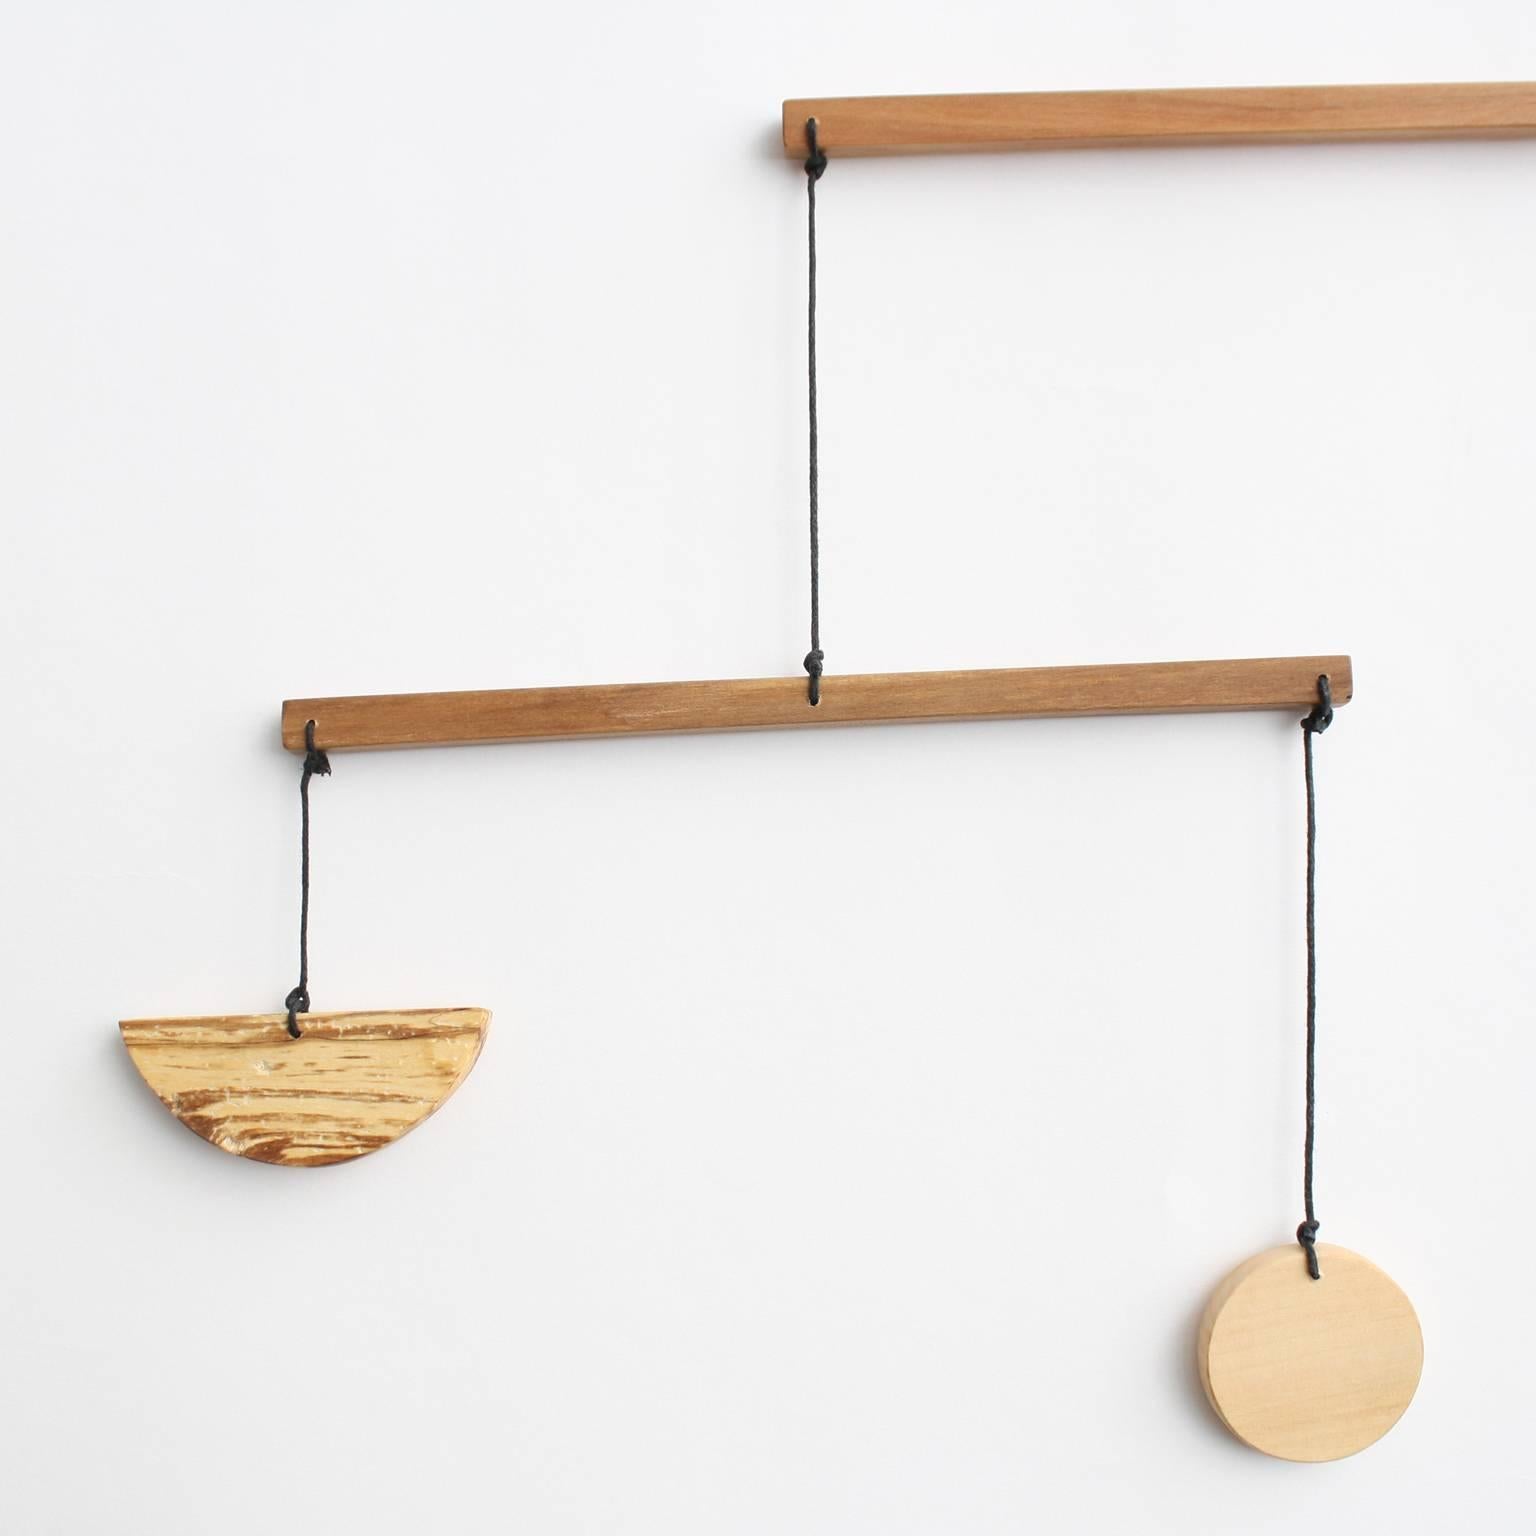 Fort Makers' Medium Apple A Mobile is made in Brooklyn by Noah Spencer. His wooden kinetic sculptures explore organic and linear form and touch upon a human fascination with the universe.

Materials: apple wood, wax string with end loop for hanging